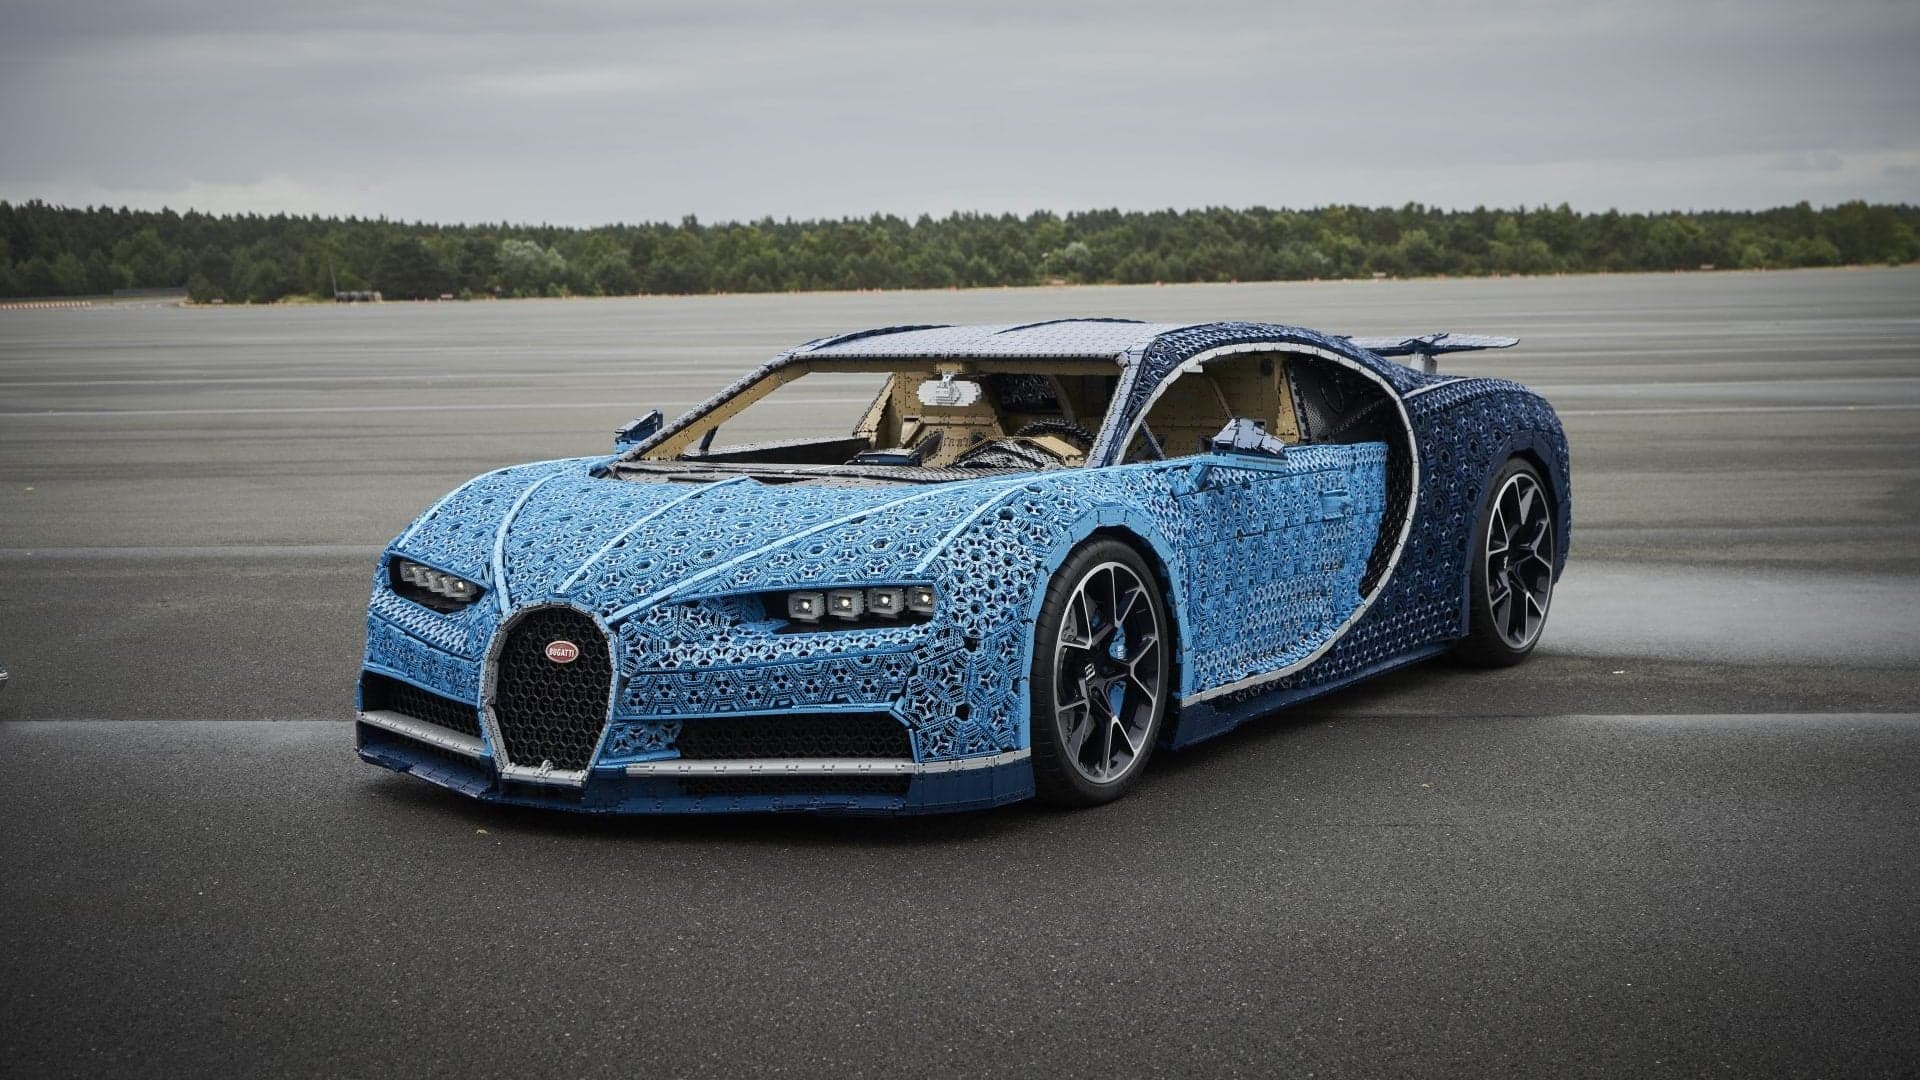 Lego Built a Full-Size Bugatti Chiron That Actually Drives